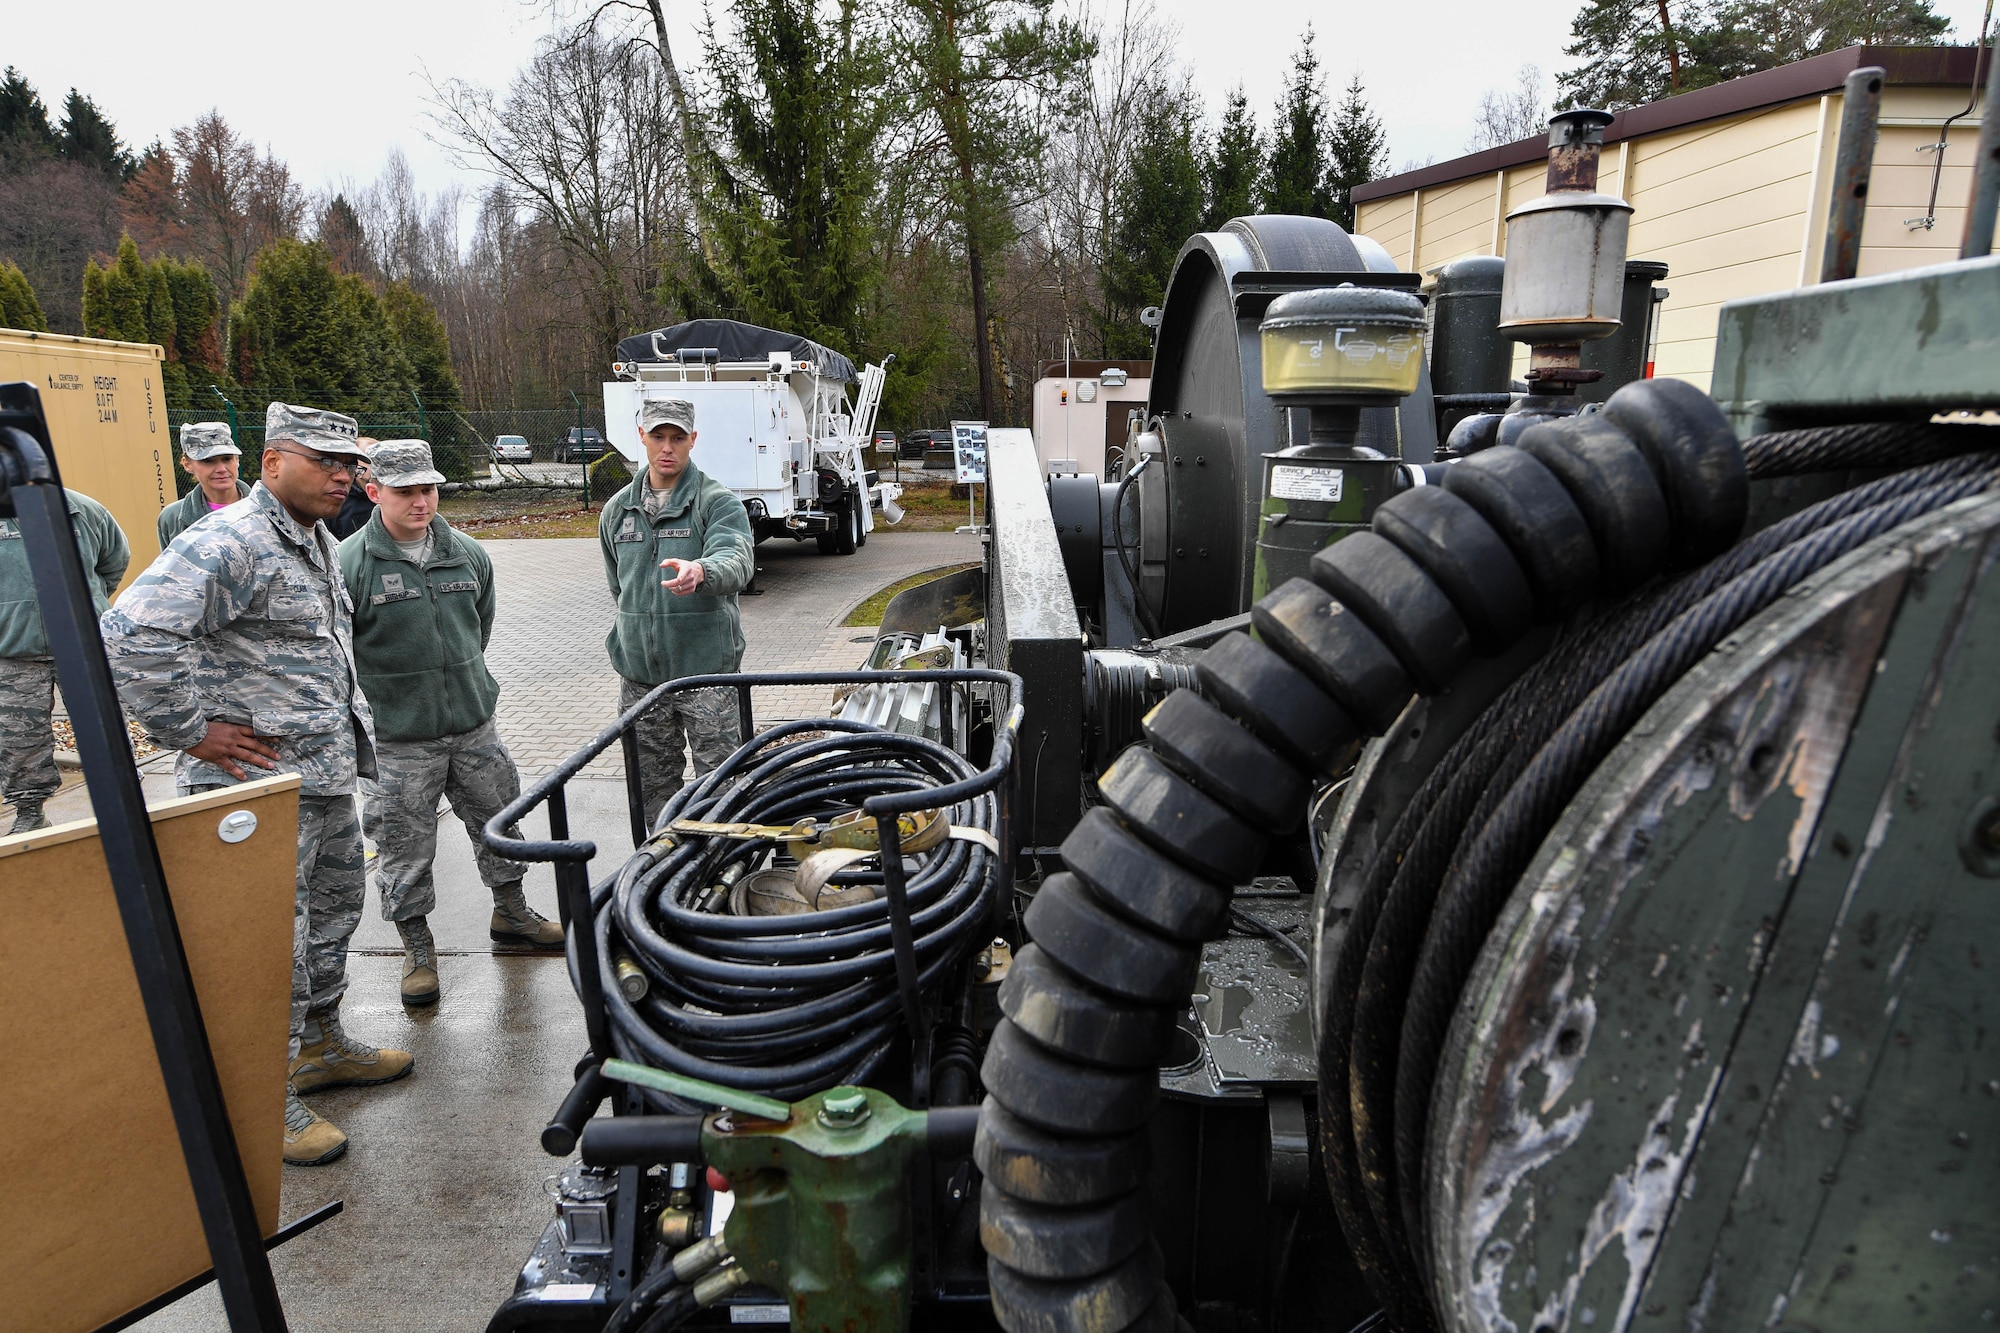 Lt. Gen. Richard M. Clark, 3rd Air Force commander, learns about equipment used by the 435th Construction and Training Squadron from Senior Airman Andrew Wiegand, 435 CTS aircraft arresting system maintenance technician, during an immersion tour of the 435th Air Ground Operations Wing at Ramstein Air Base, Germany, Feb. 3 2017. The tour featured displays from squadrons within the 4th Air Support Operations Group, 435th Air and Space Communications Group, and 435th Contingency Response Group. (U.S. Air Force photo by Senior Airman Tryphena Mayhugh) 